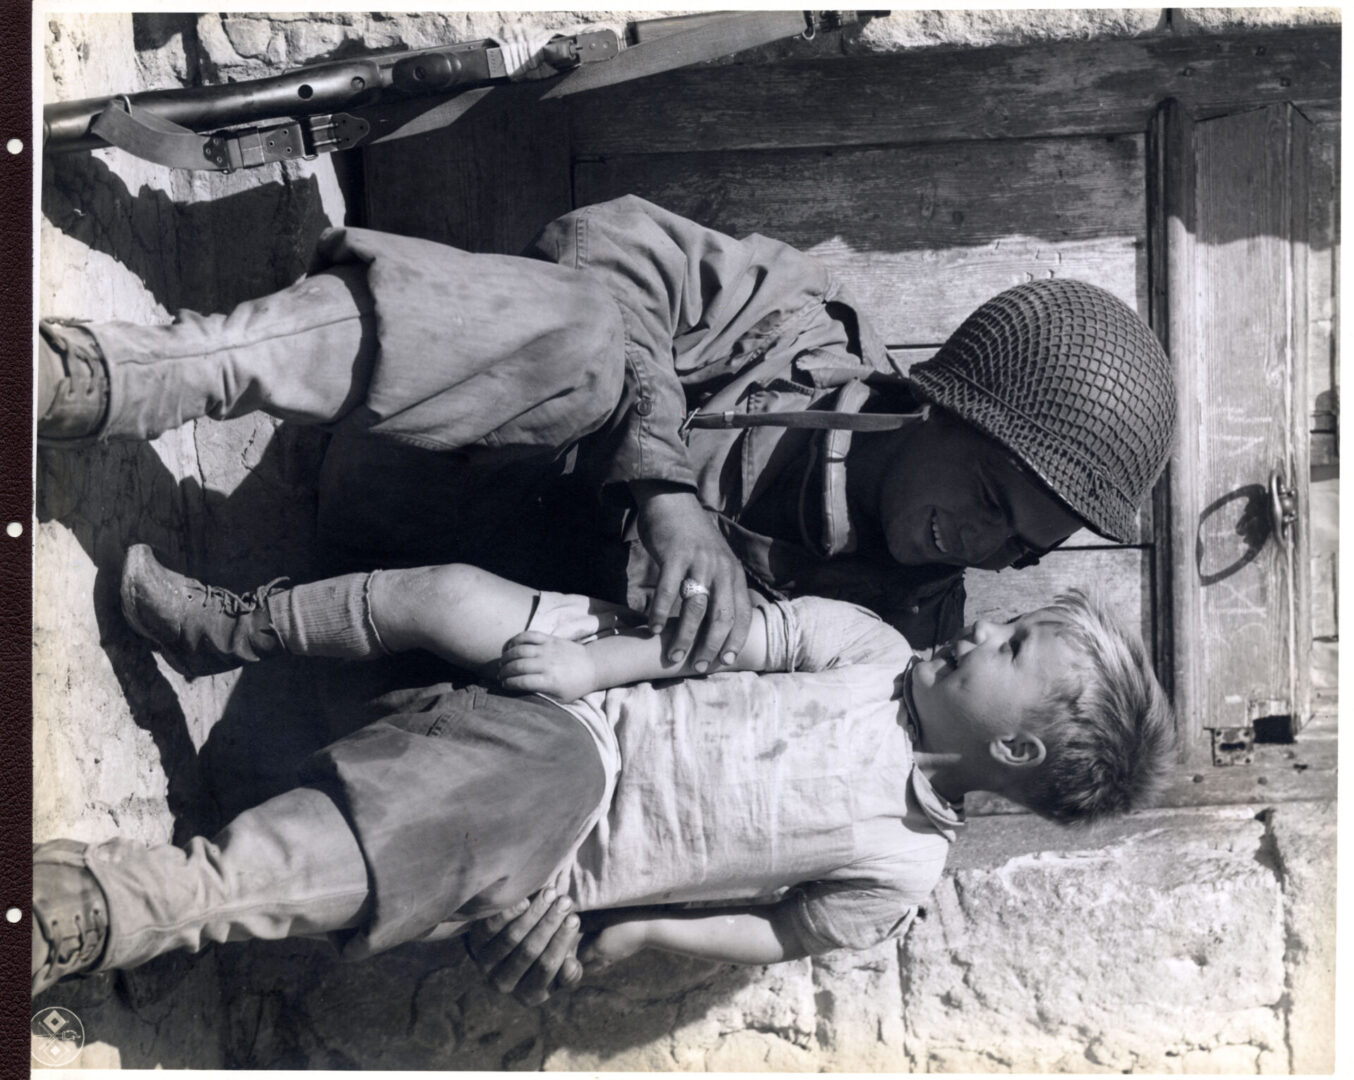 An American soldier bonds with a young French boy